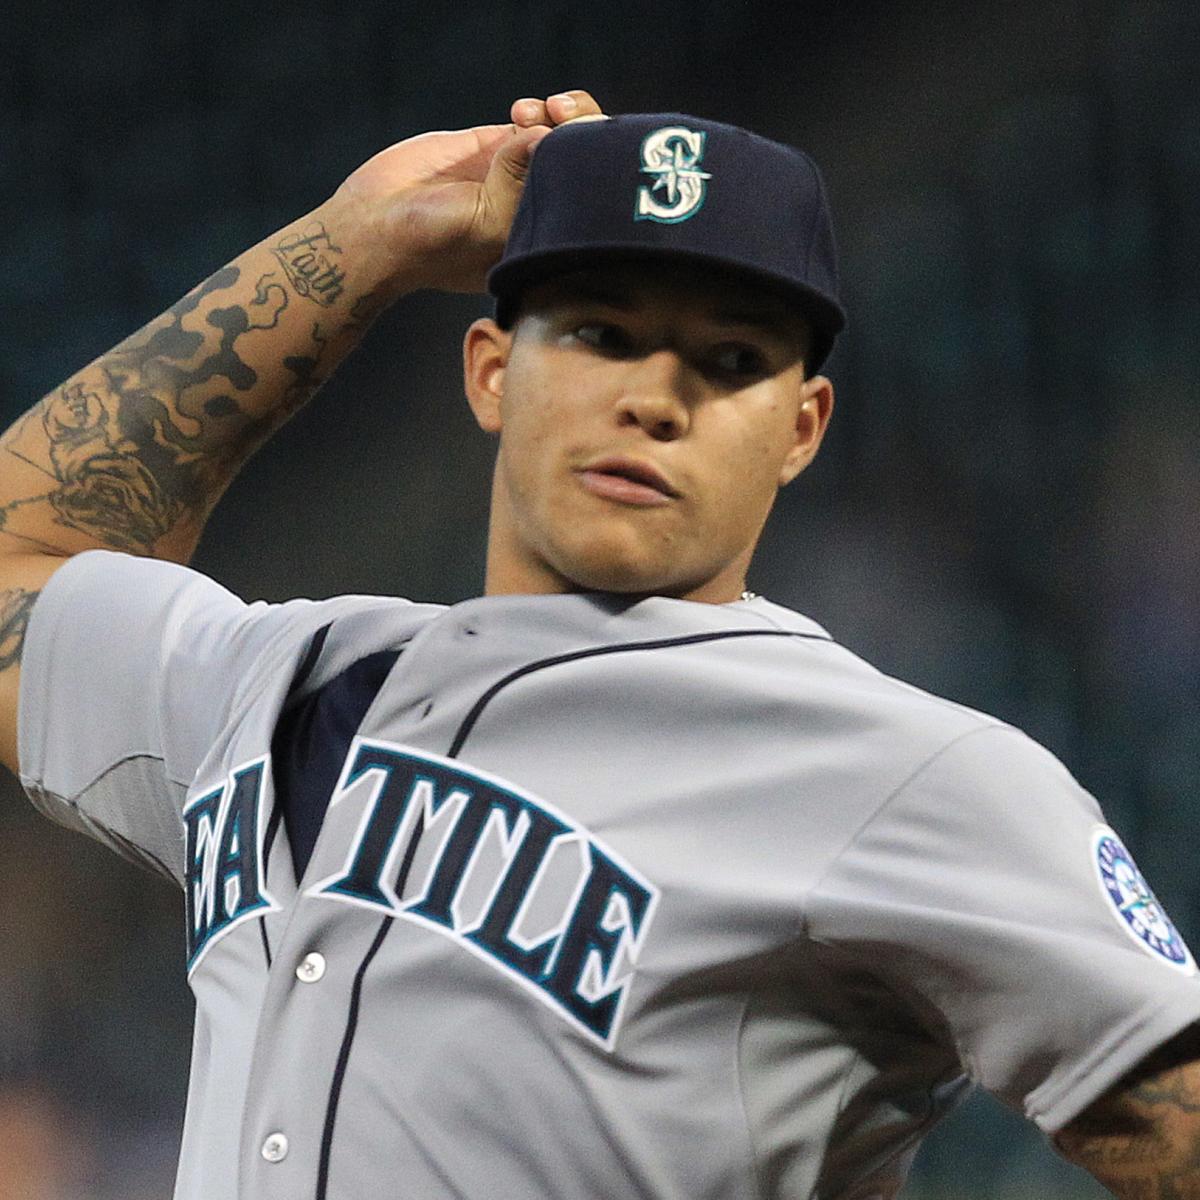 How Taijuan Walker Compares to MLB's Great Crop of Rookie Pitchers